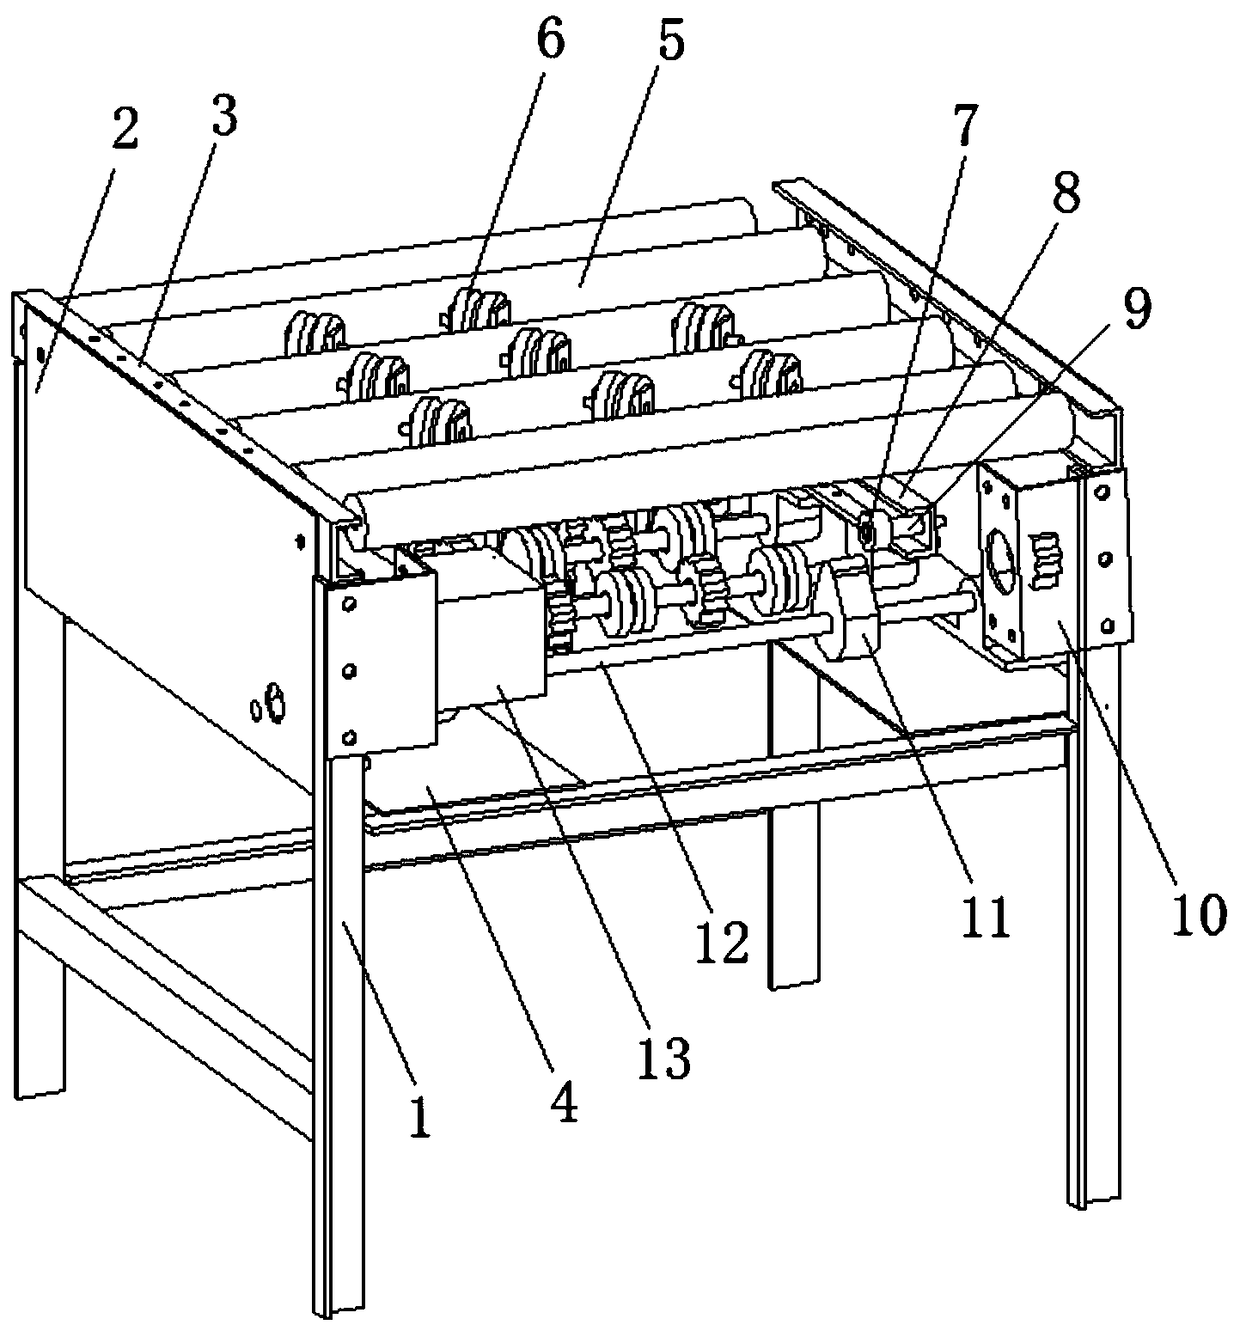 Mail automatic sorting device